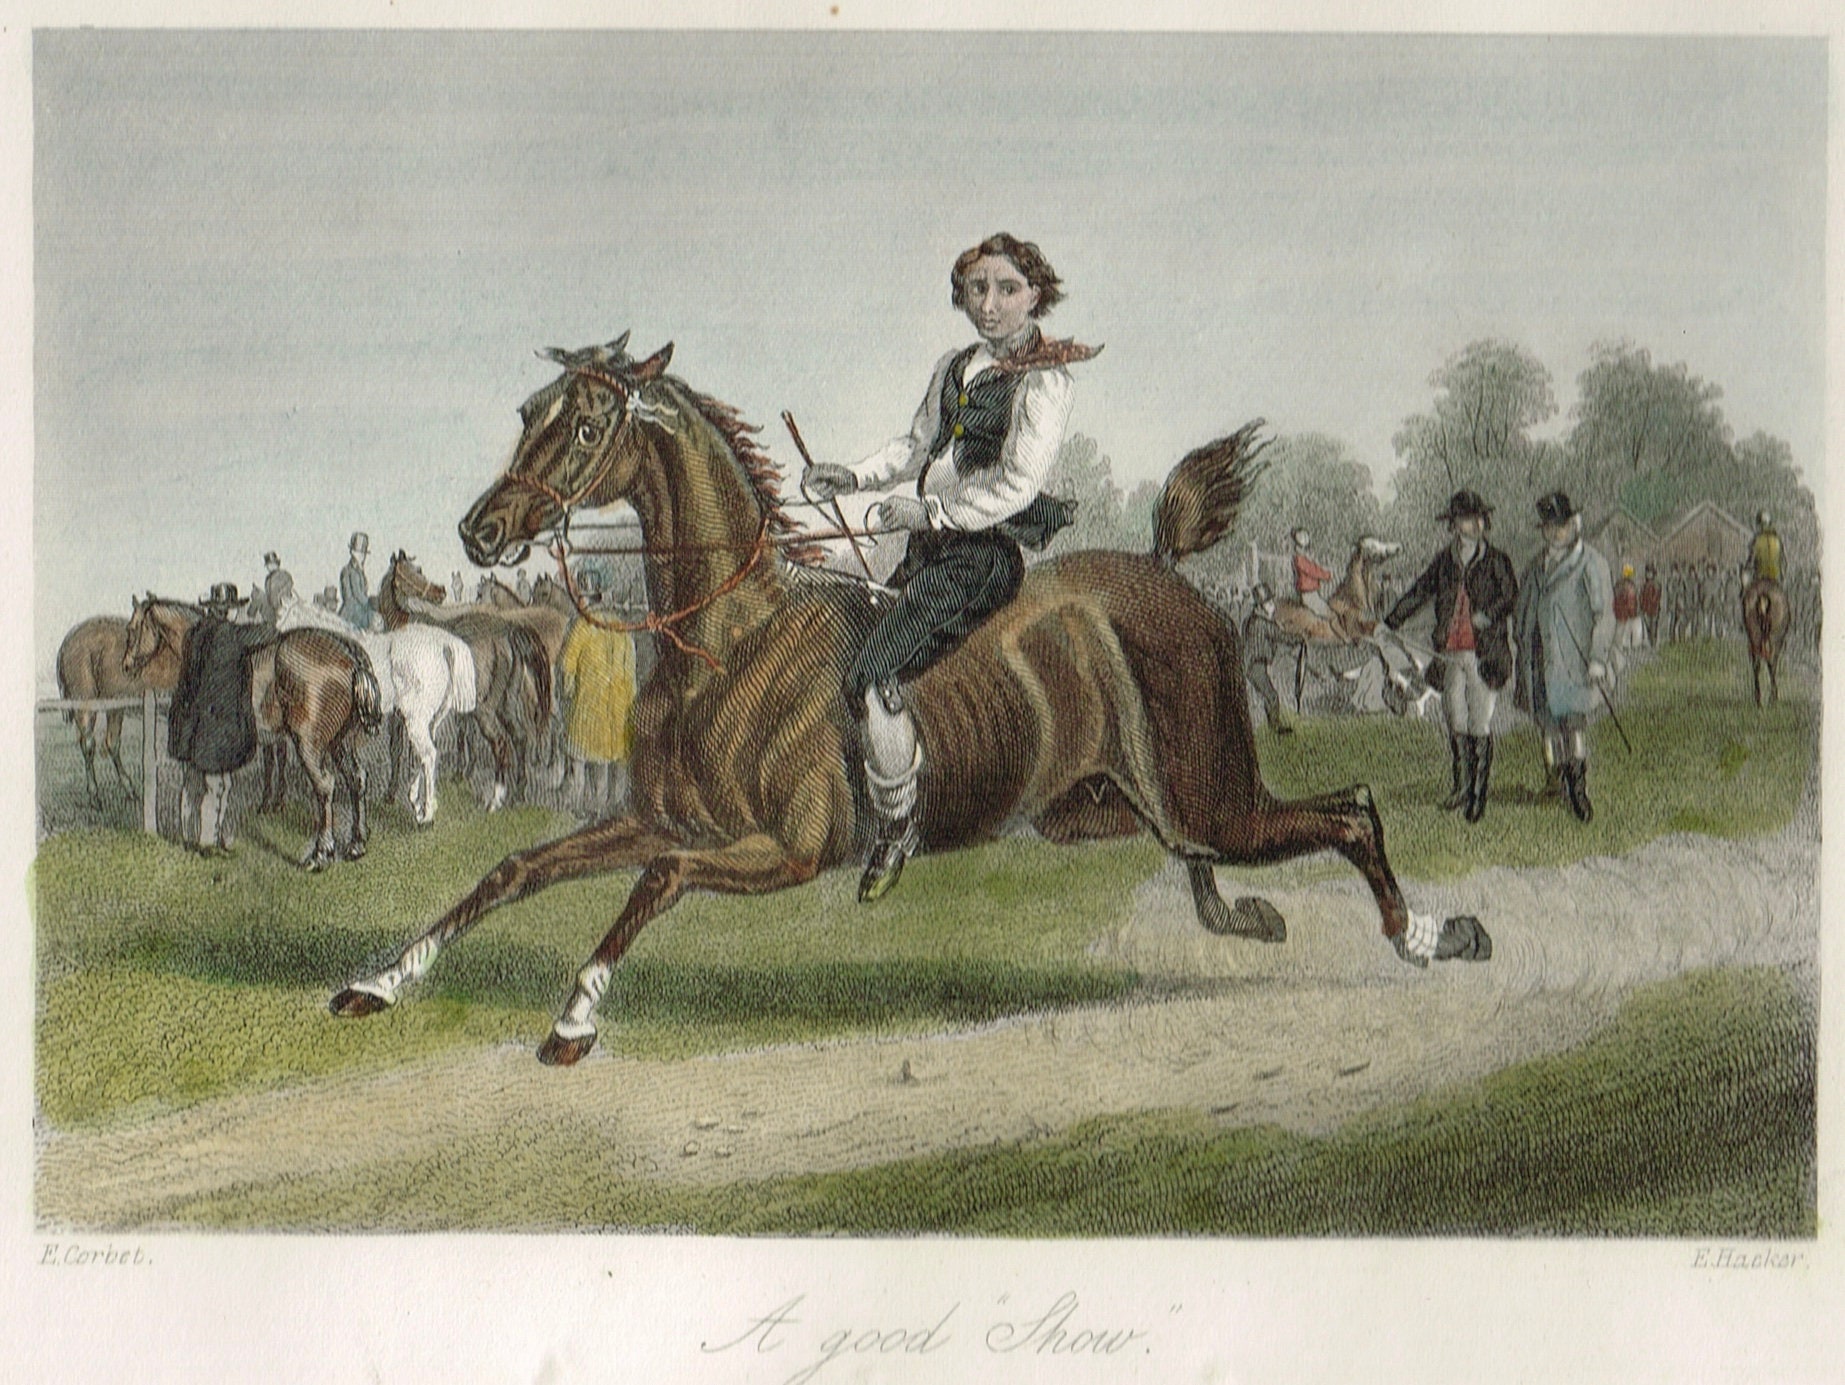 Antique original vintage 1800s mounted early Victorian hand coloured colored etching engraving print ' Going to Scale ' jockey by F C Turner